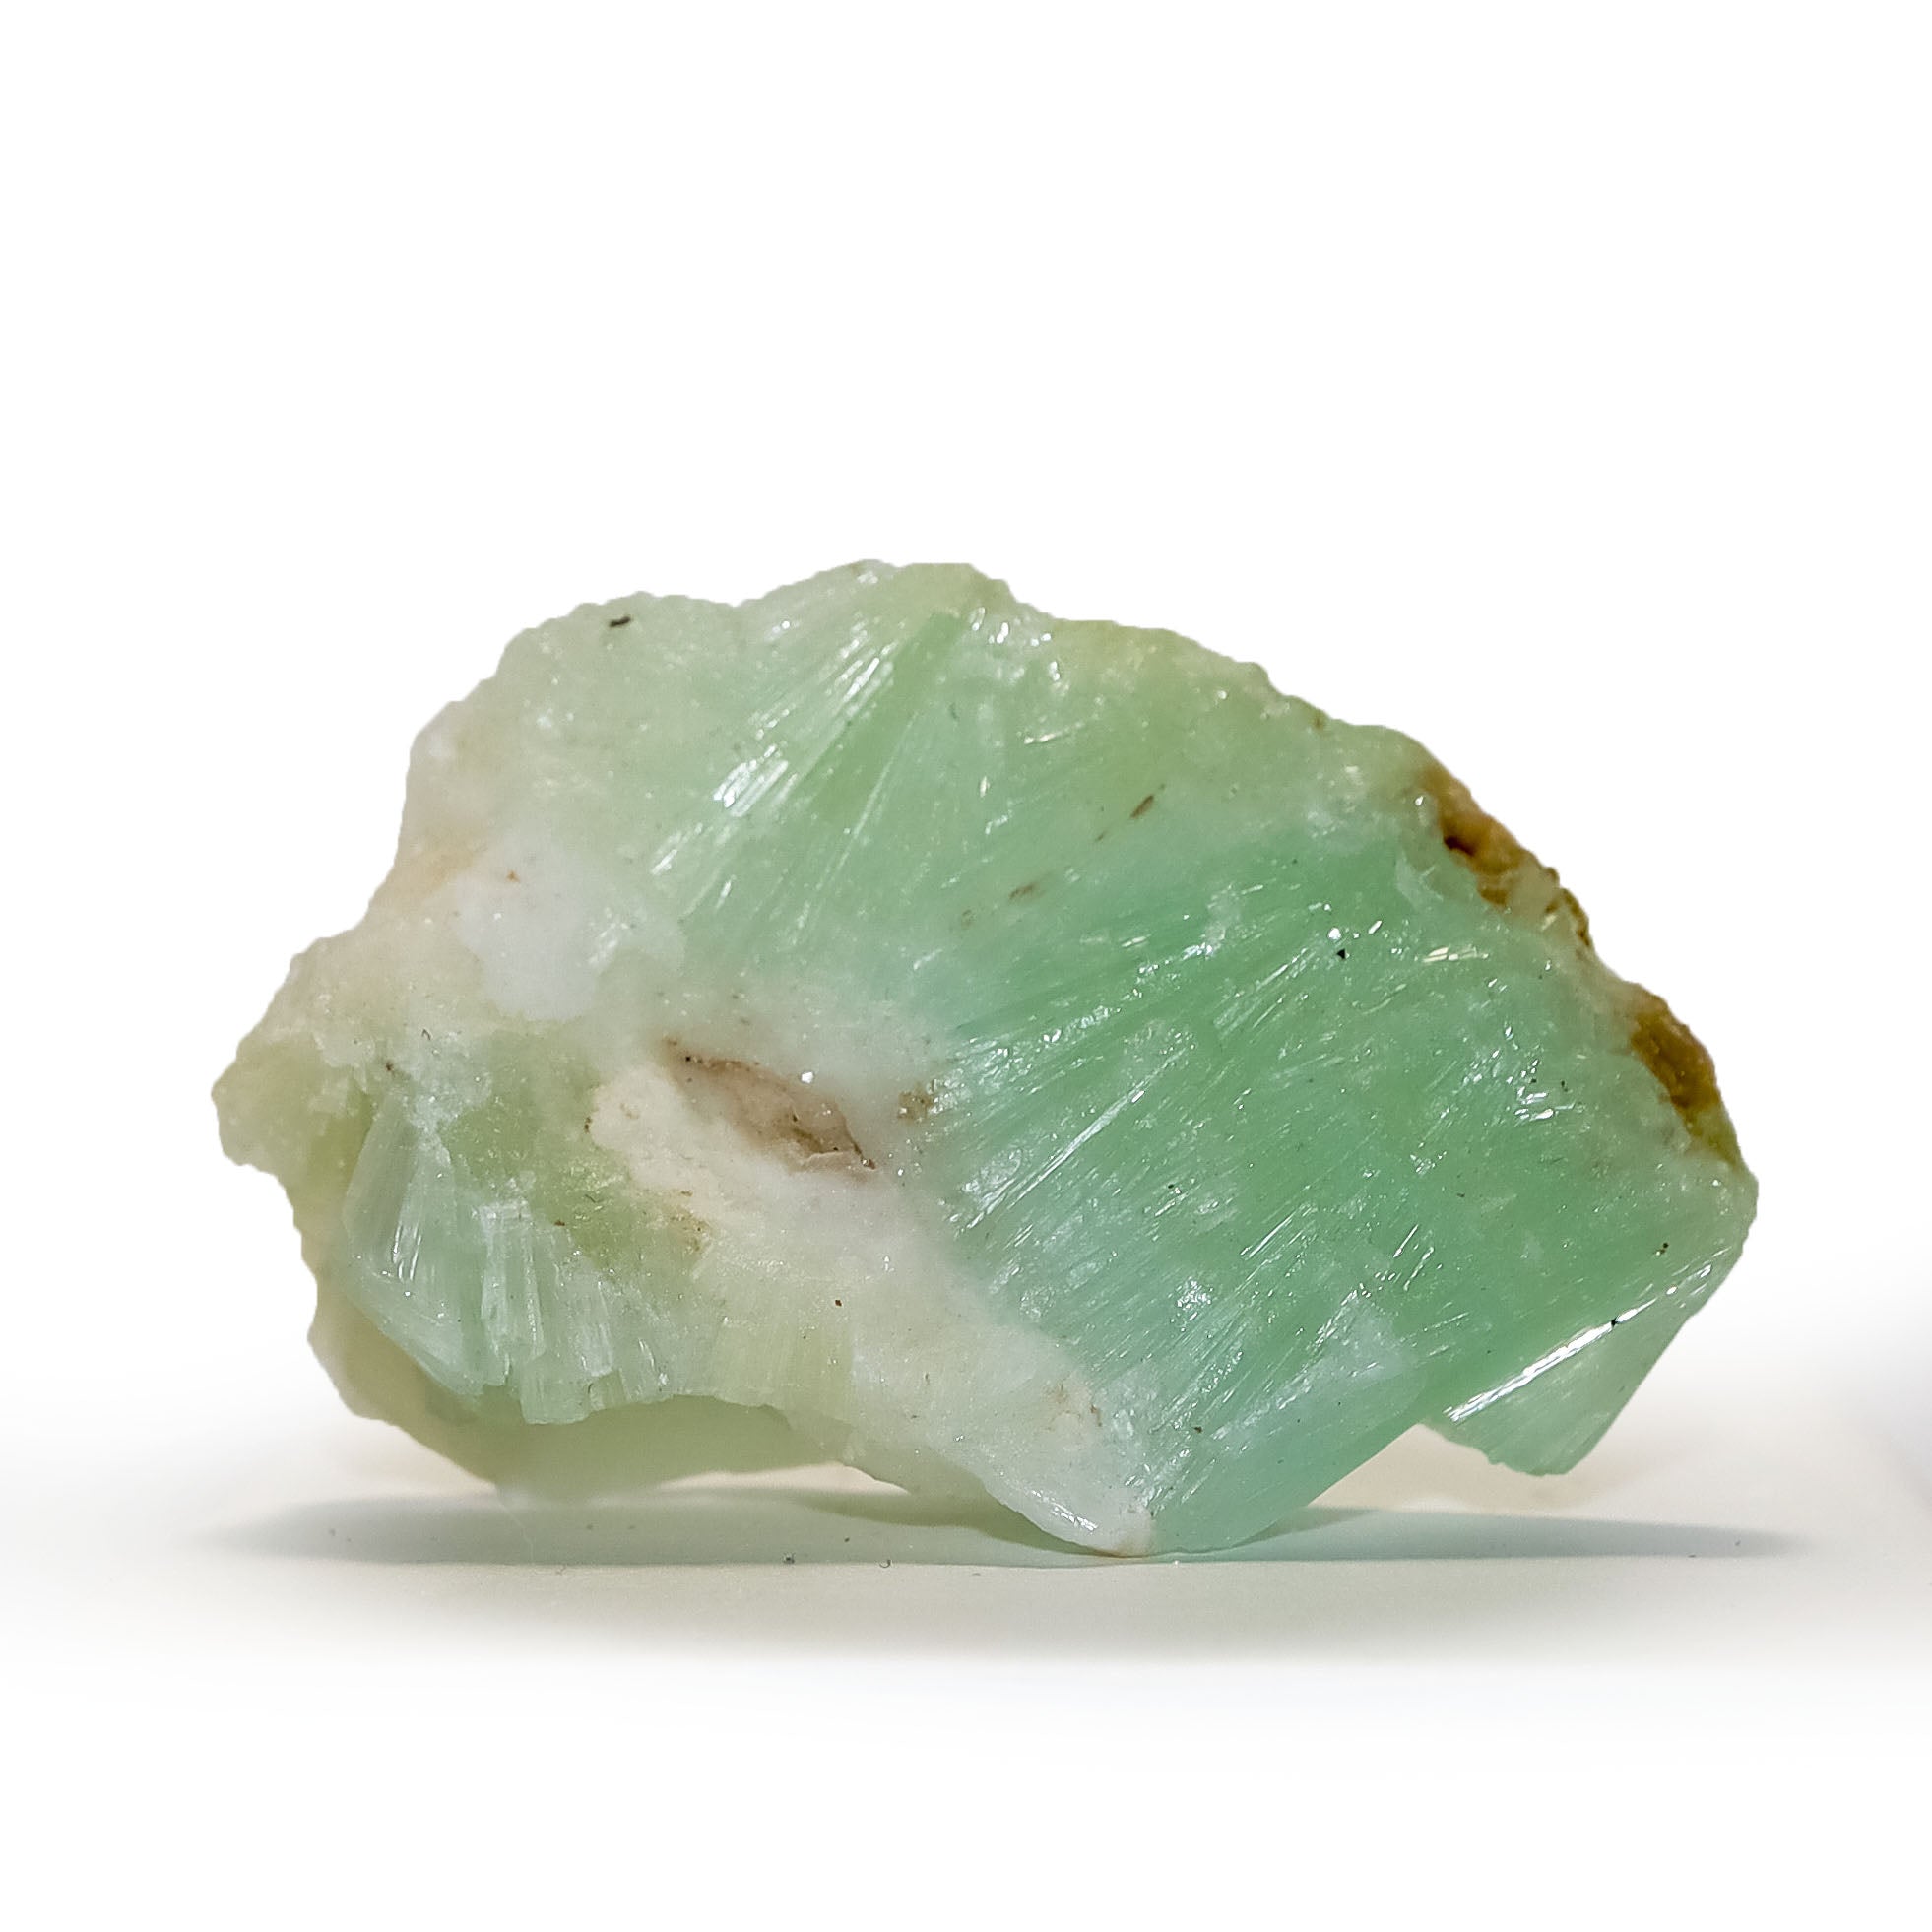 Raw Caribbean Calcite Stone for Joy and Relaxation